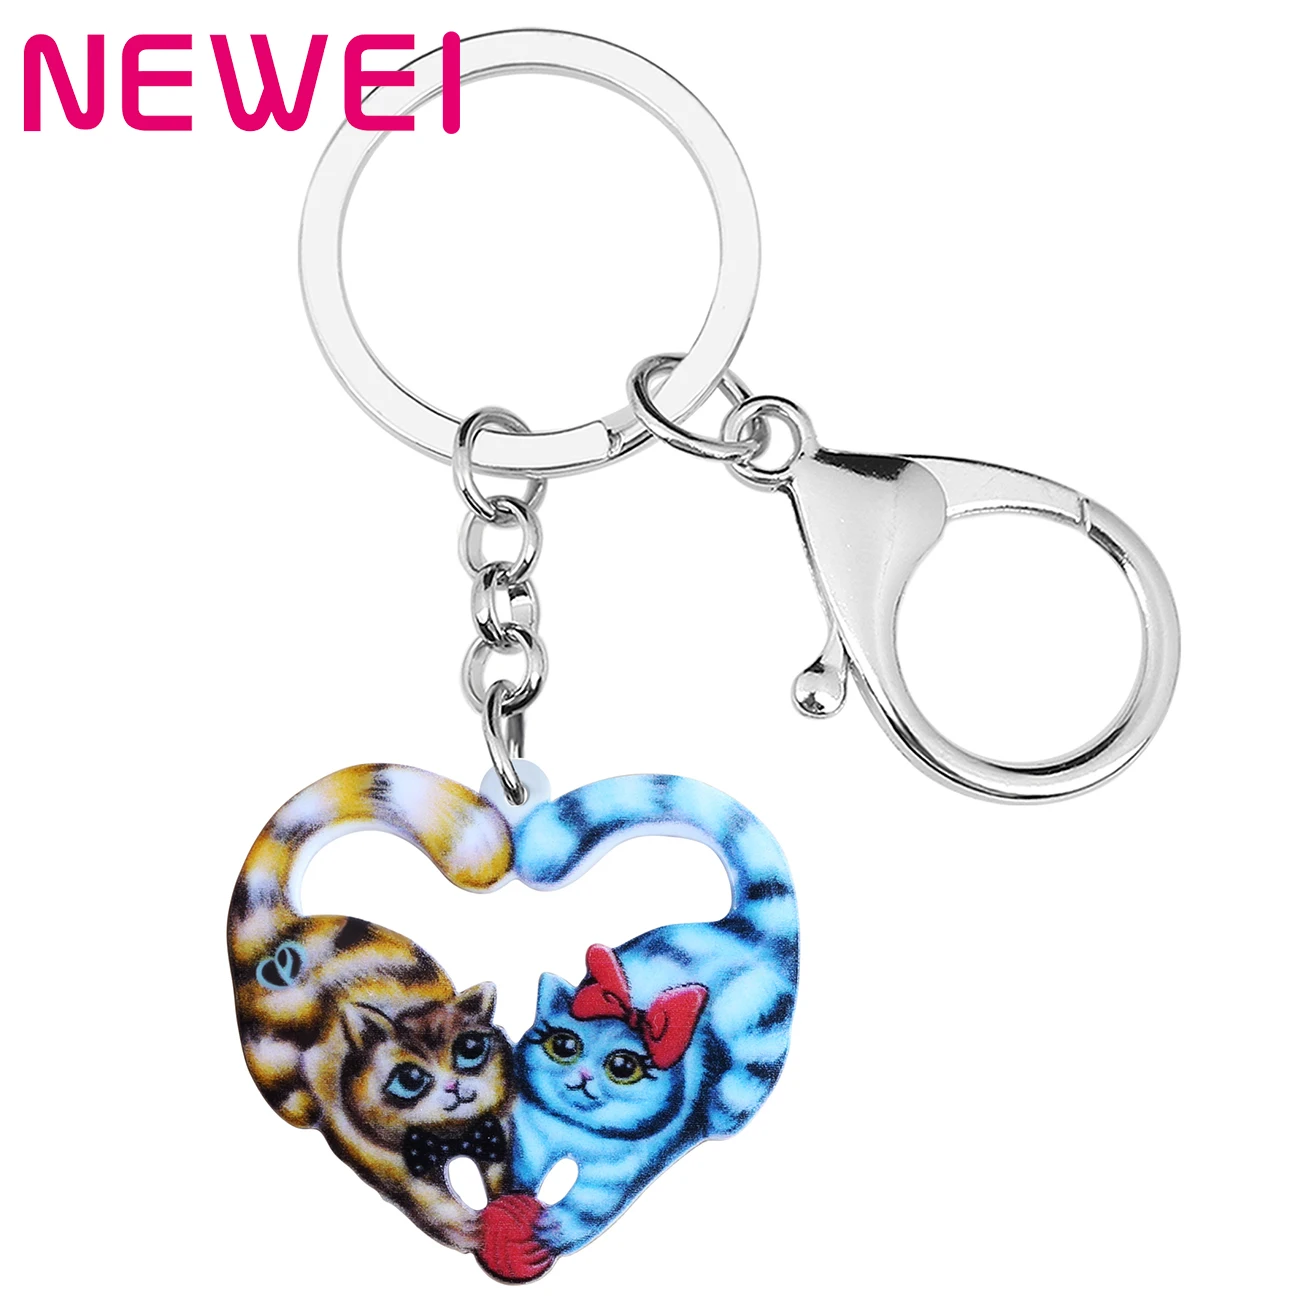 

NEWEI Valentines Day Acrylic Heart Cat Kitten Keychains Car Bag Purse Key Ring Chain Gifts Fashion Jewelry for Women Girls Teens